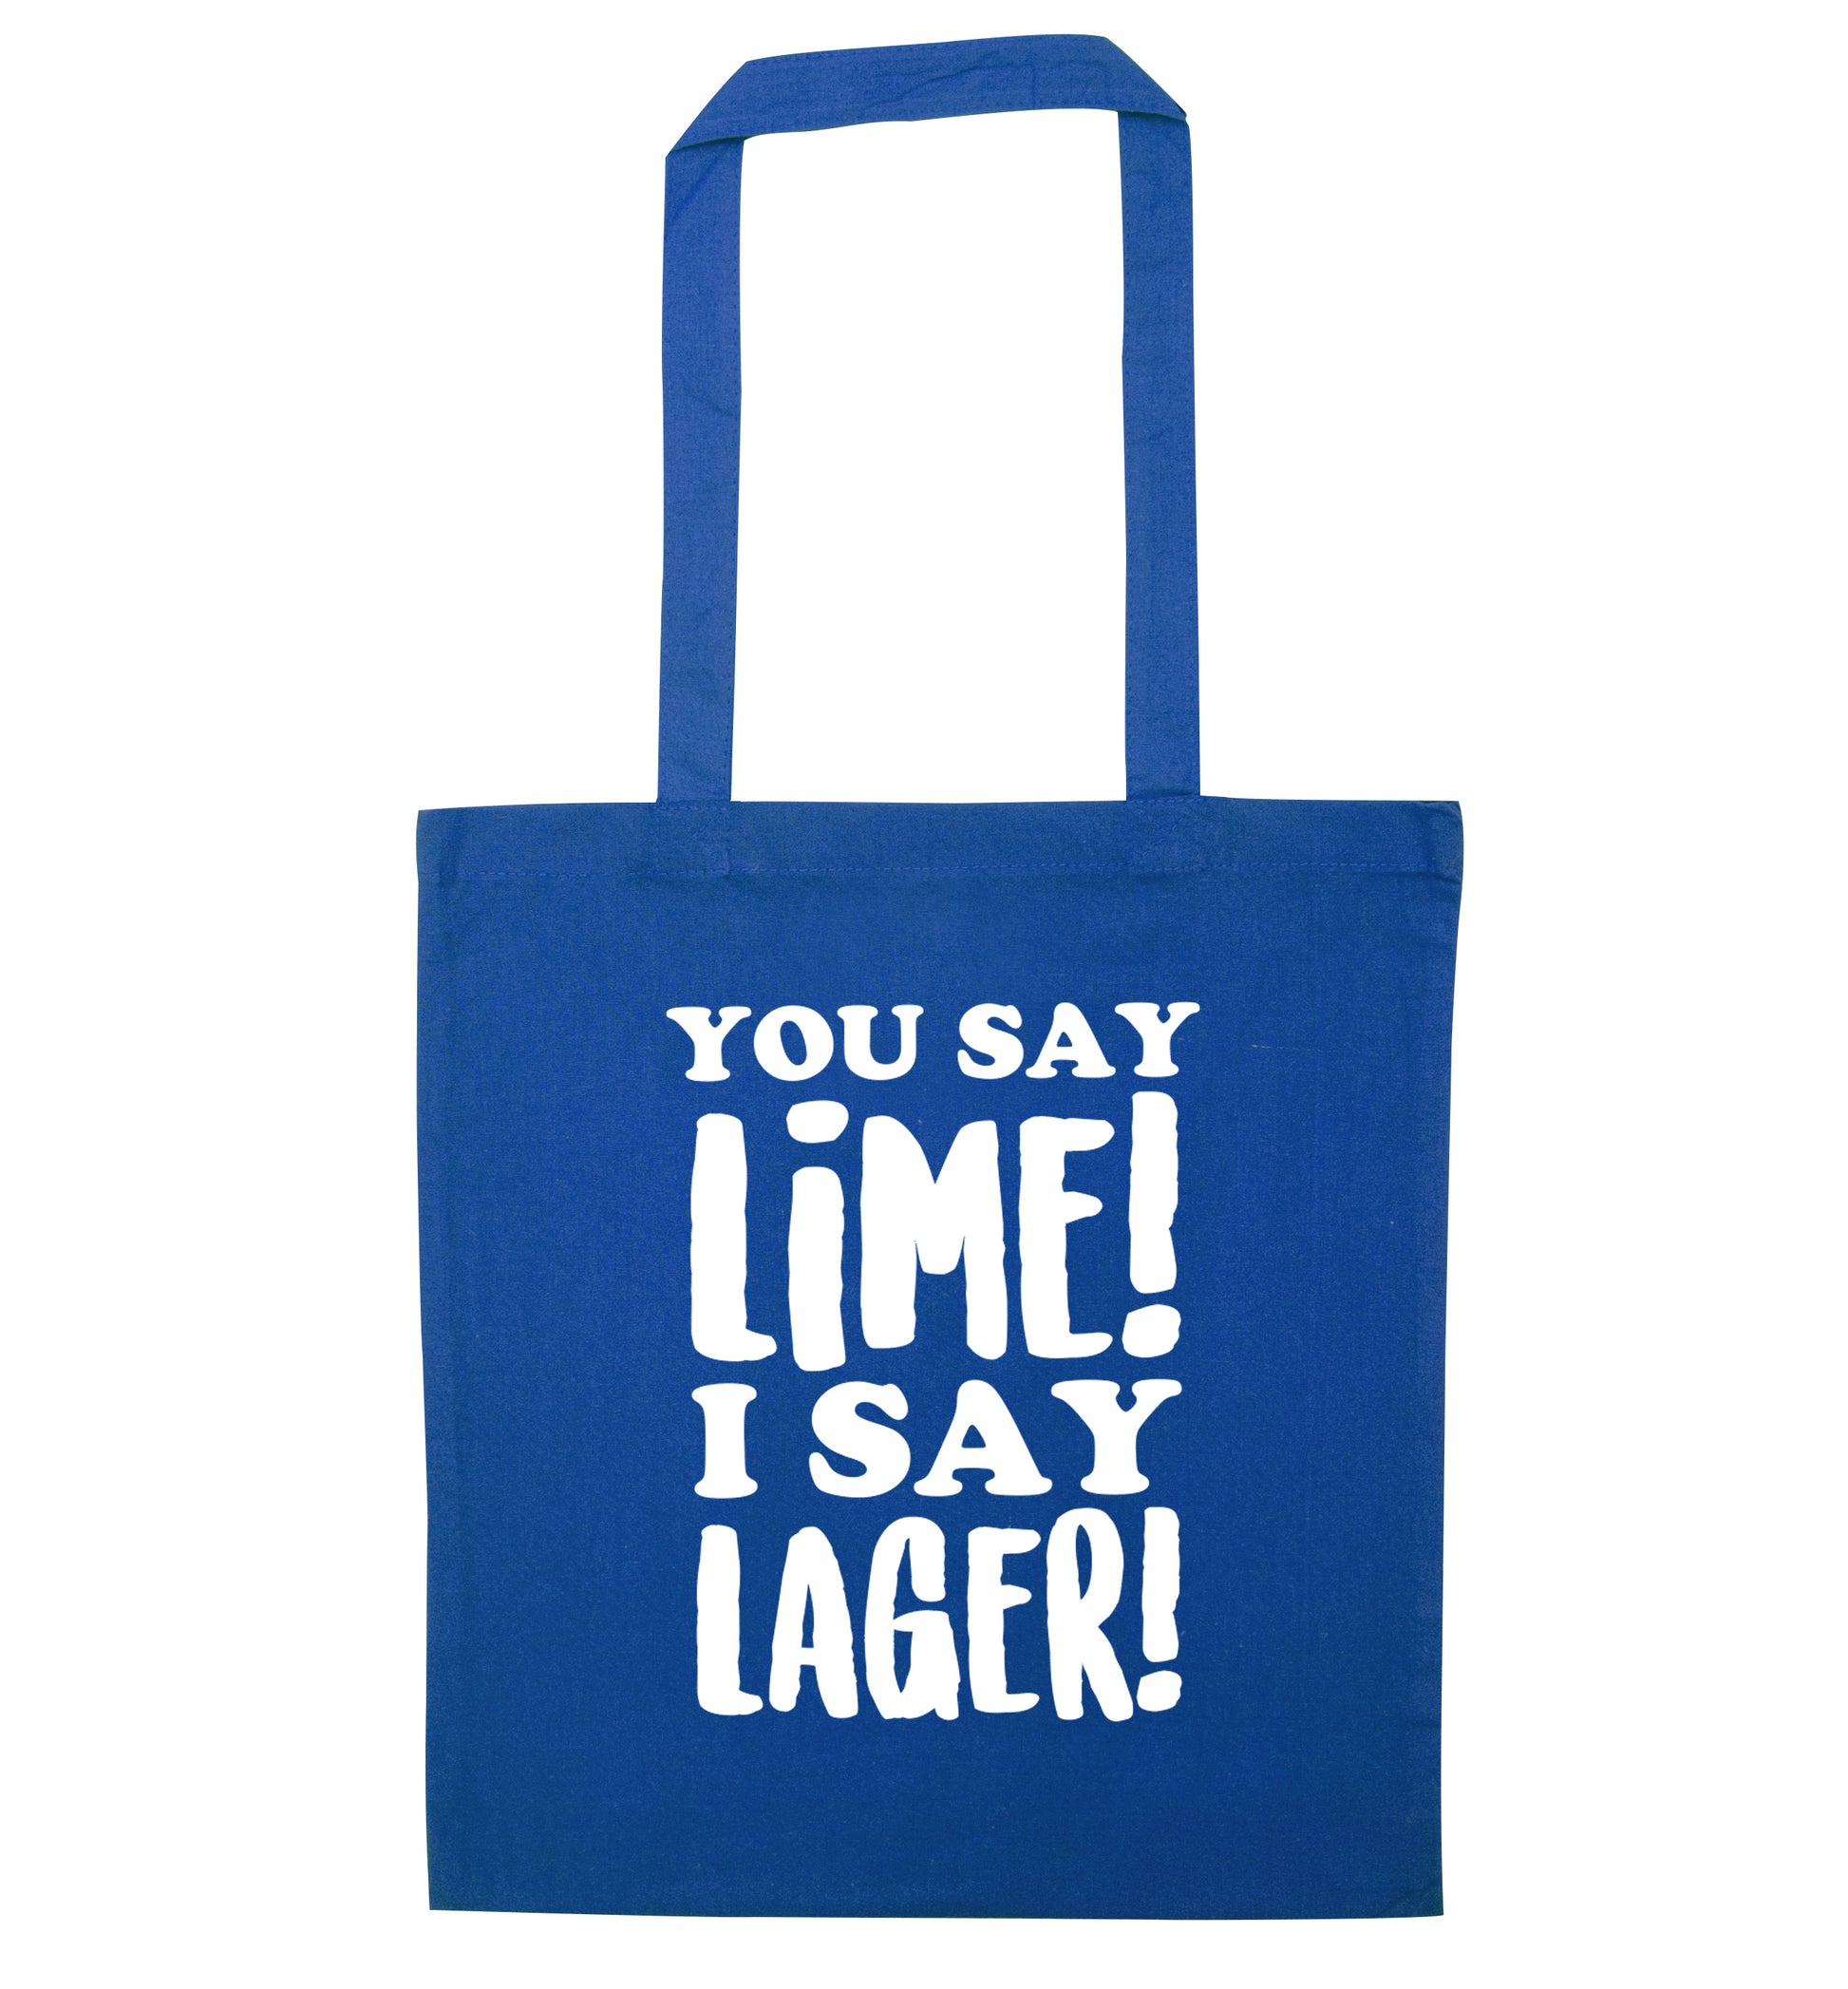 You say lime I say lager! blue tote bag